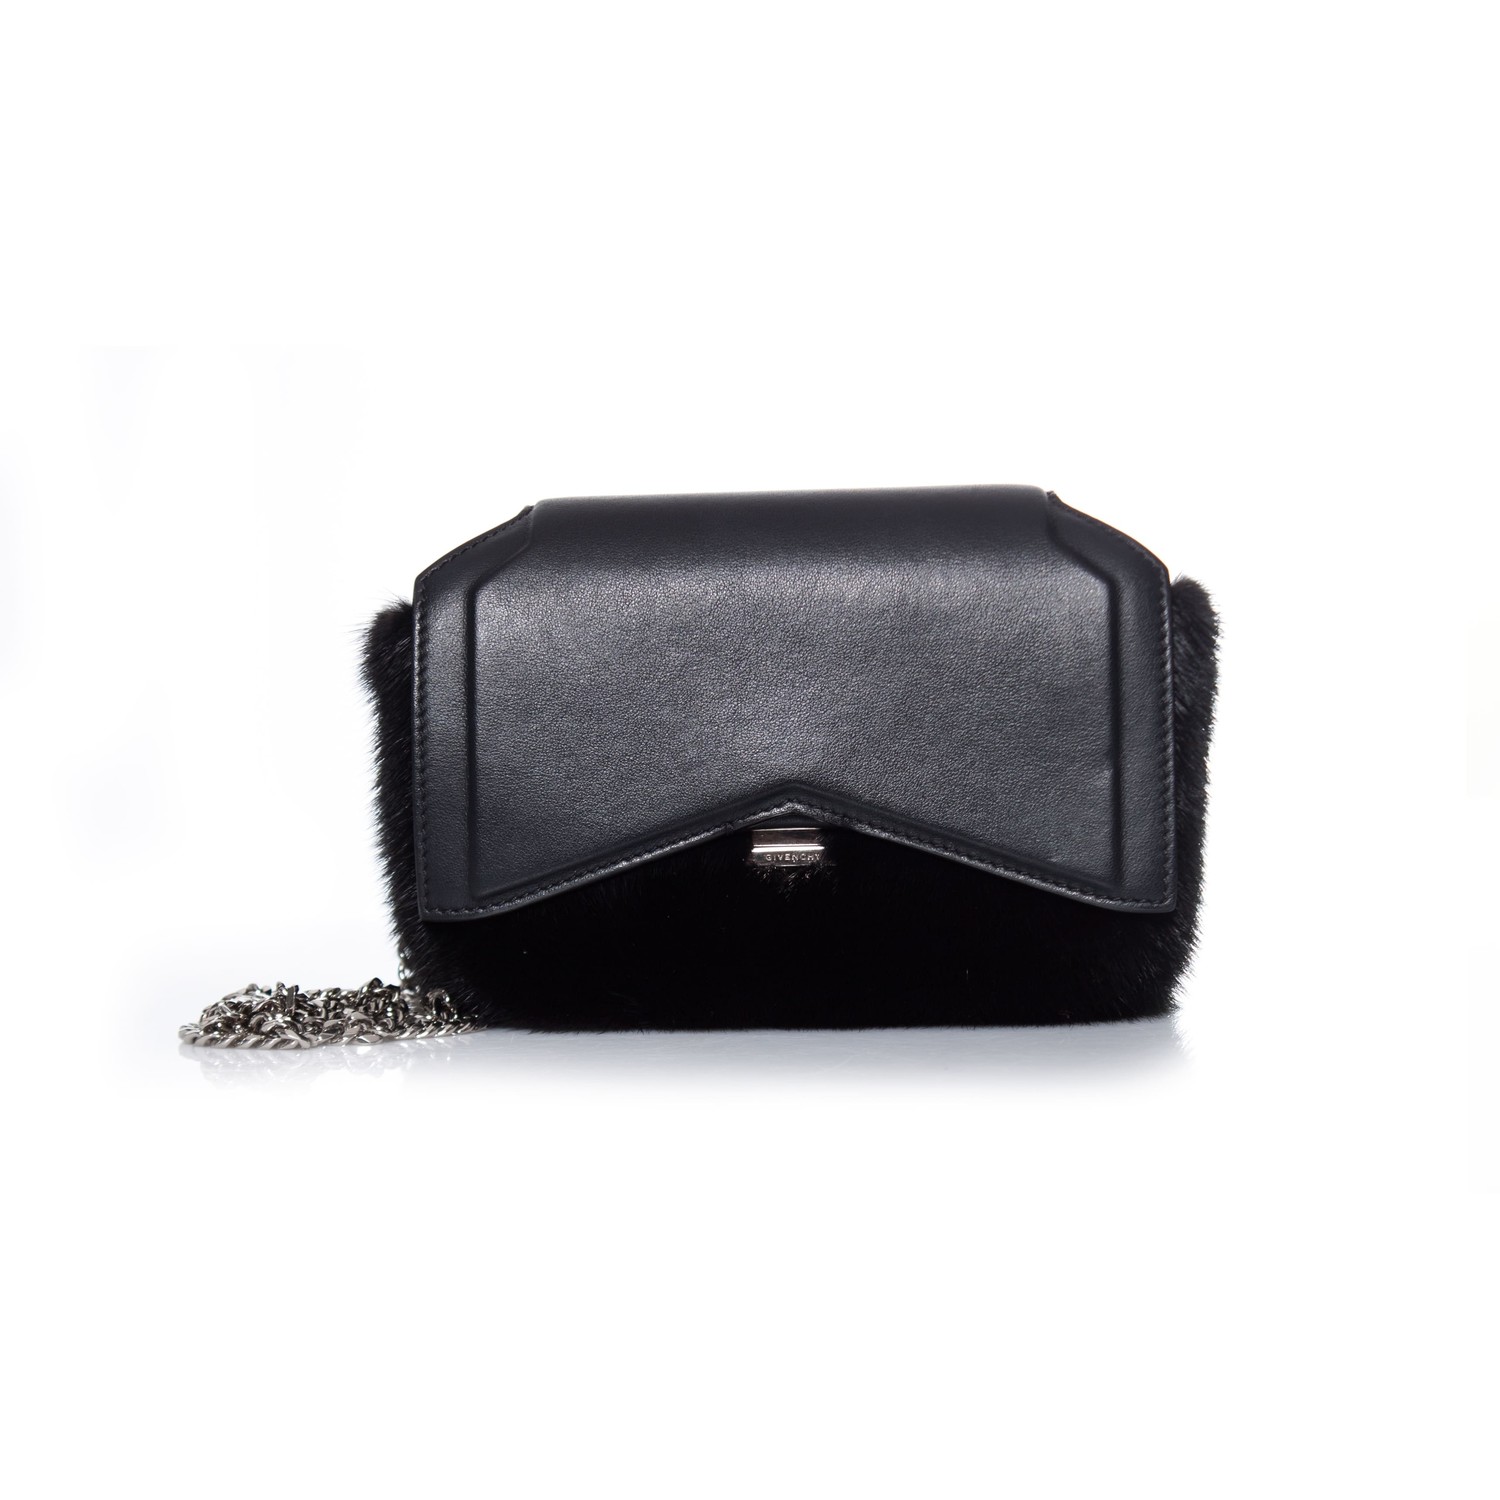 Givenchy Handbags, Purses & Wallets for Women | Nordstrom